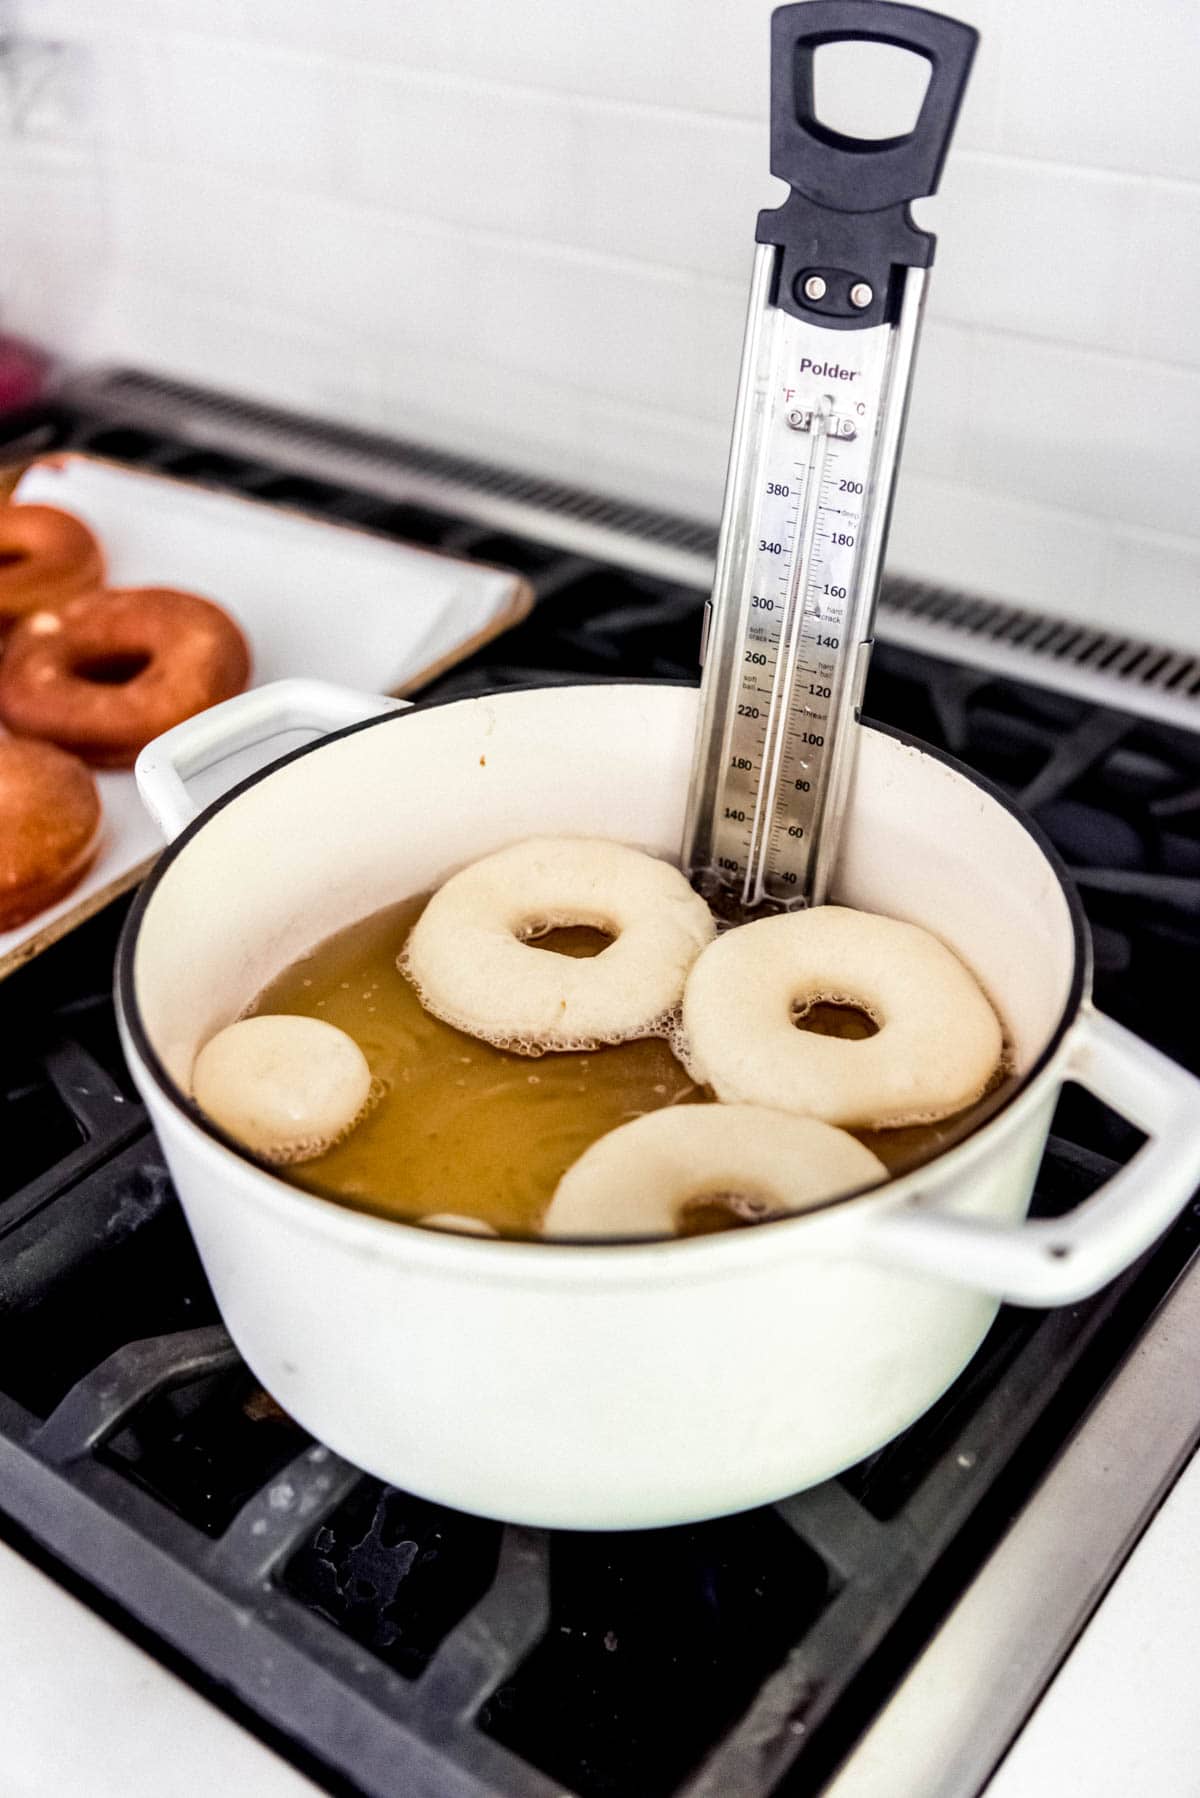 Frying yeast donuts in hot oil on the stovetop.